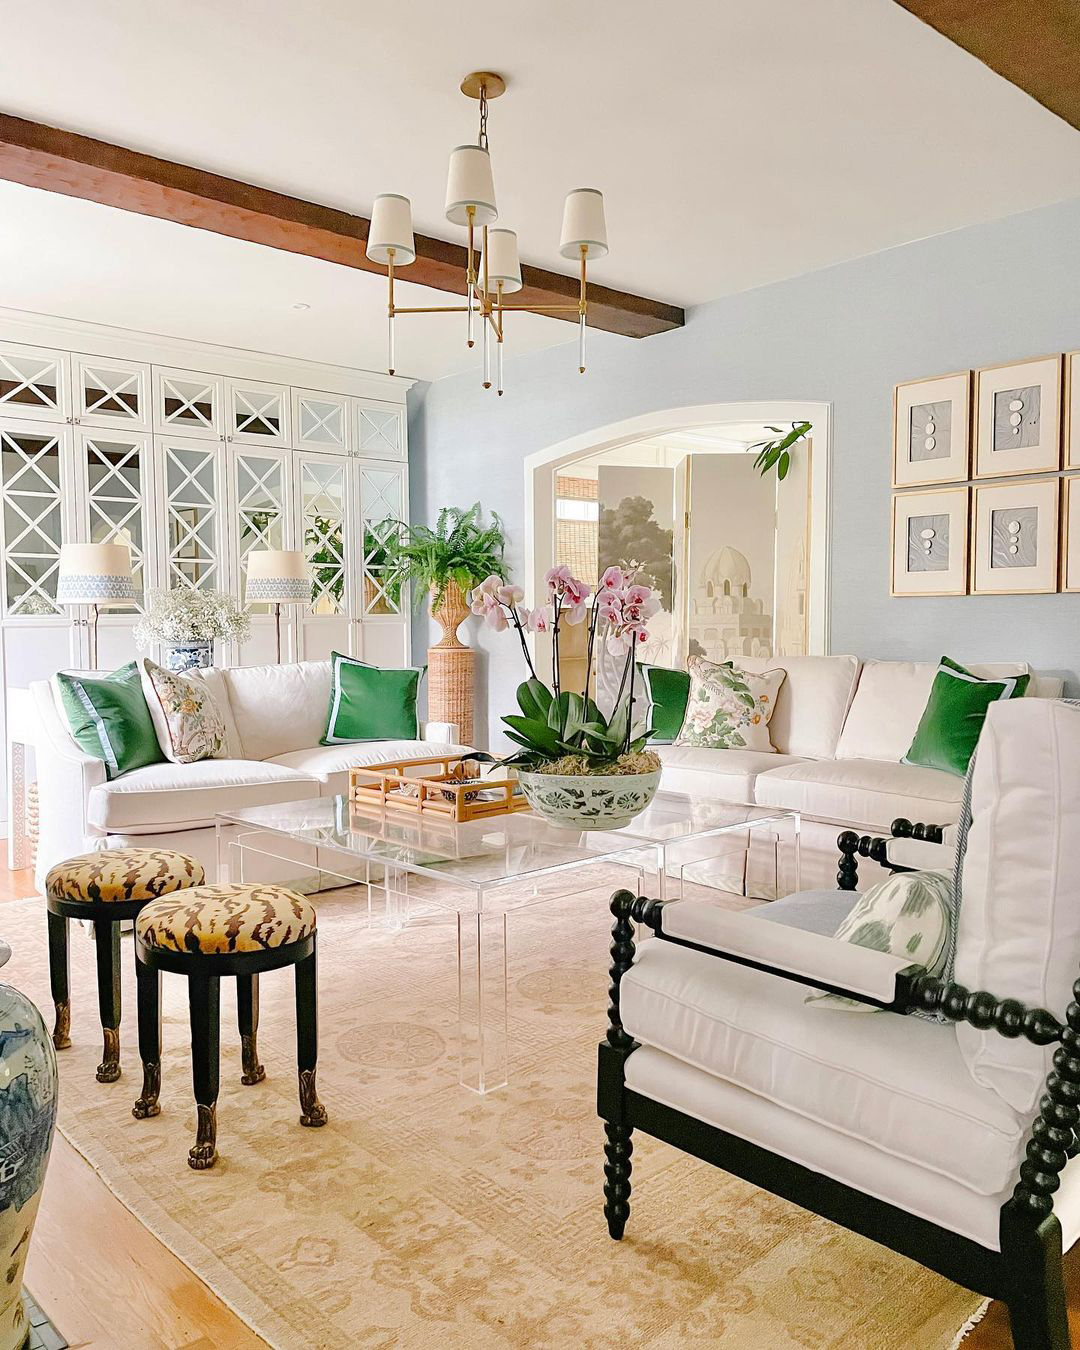 Elegant coastal grandmother sitting room with timeless furniture pieces brightened with pops of green and soft blue